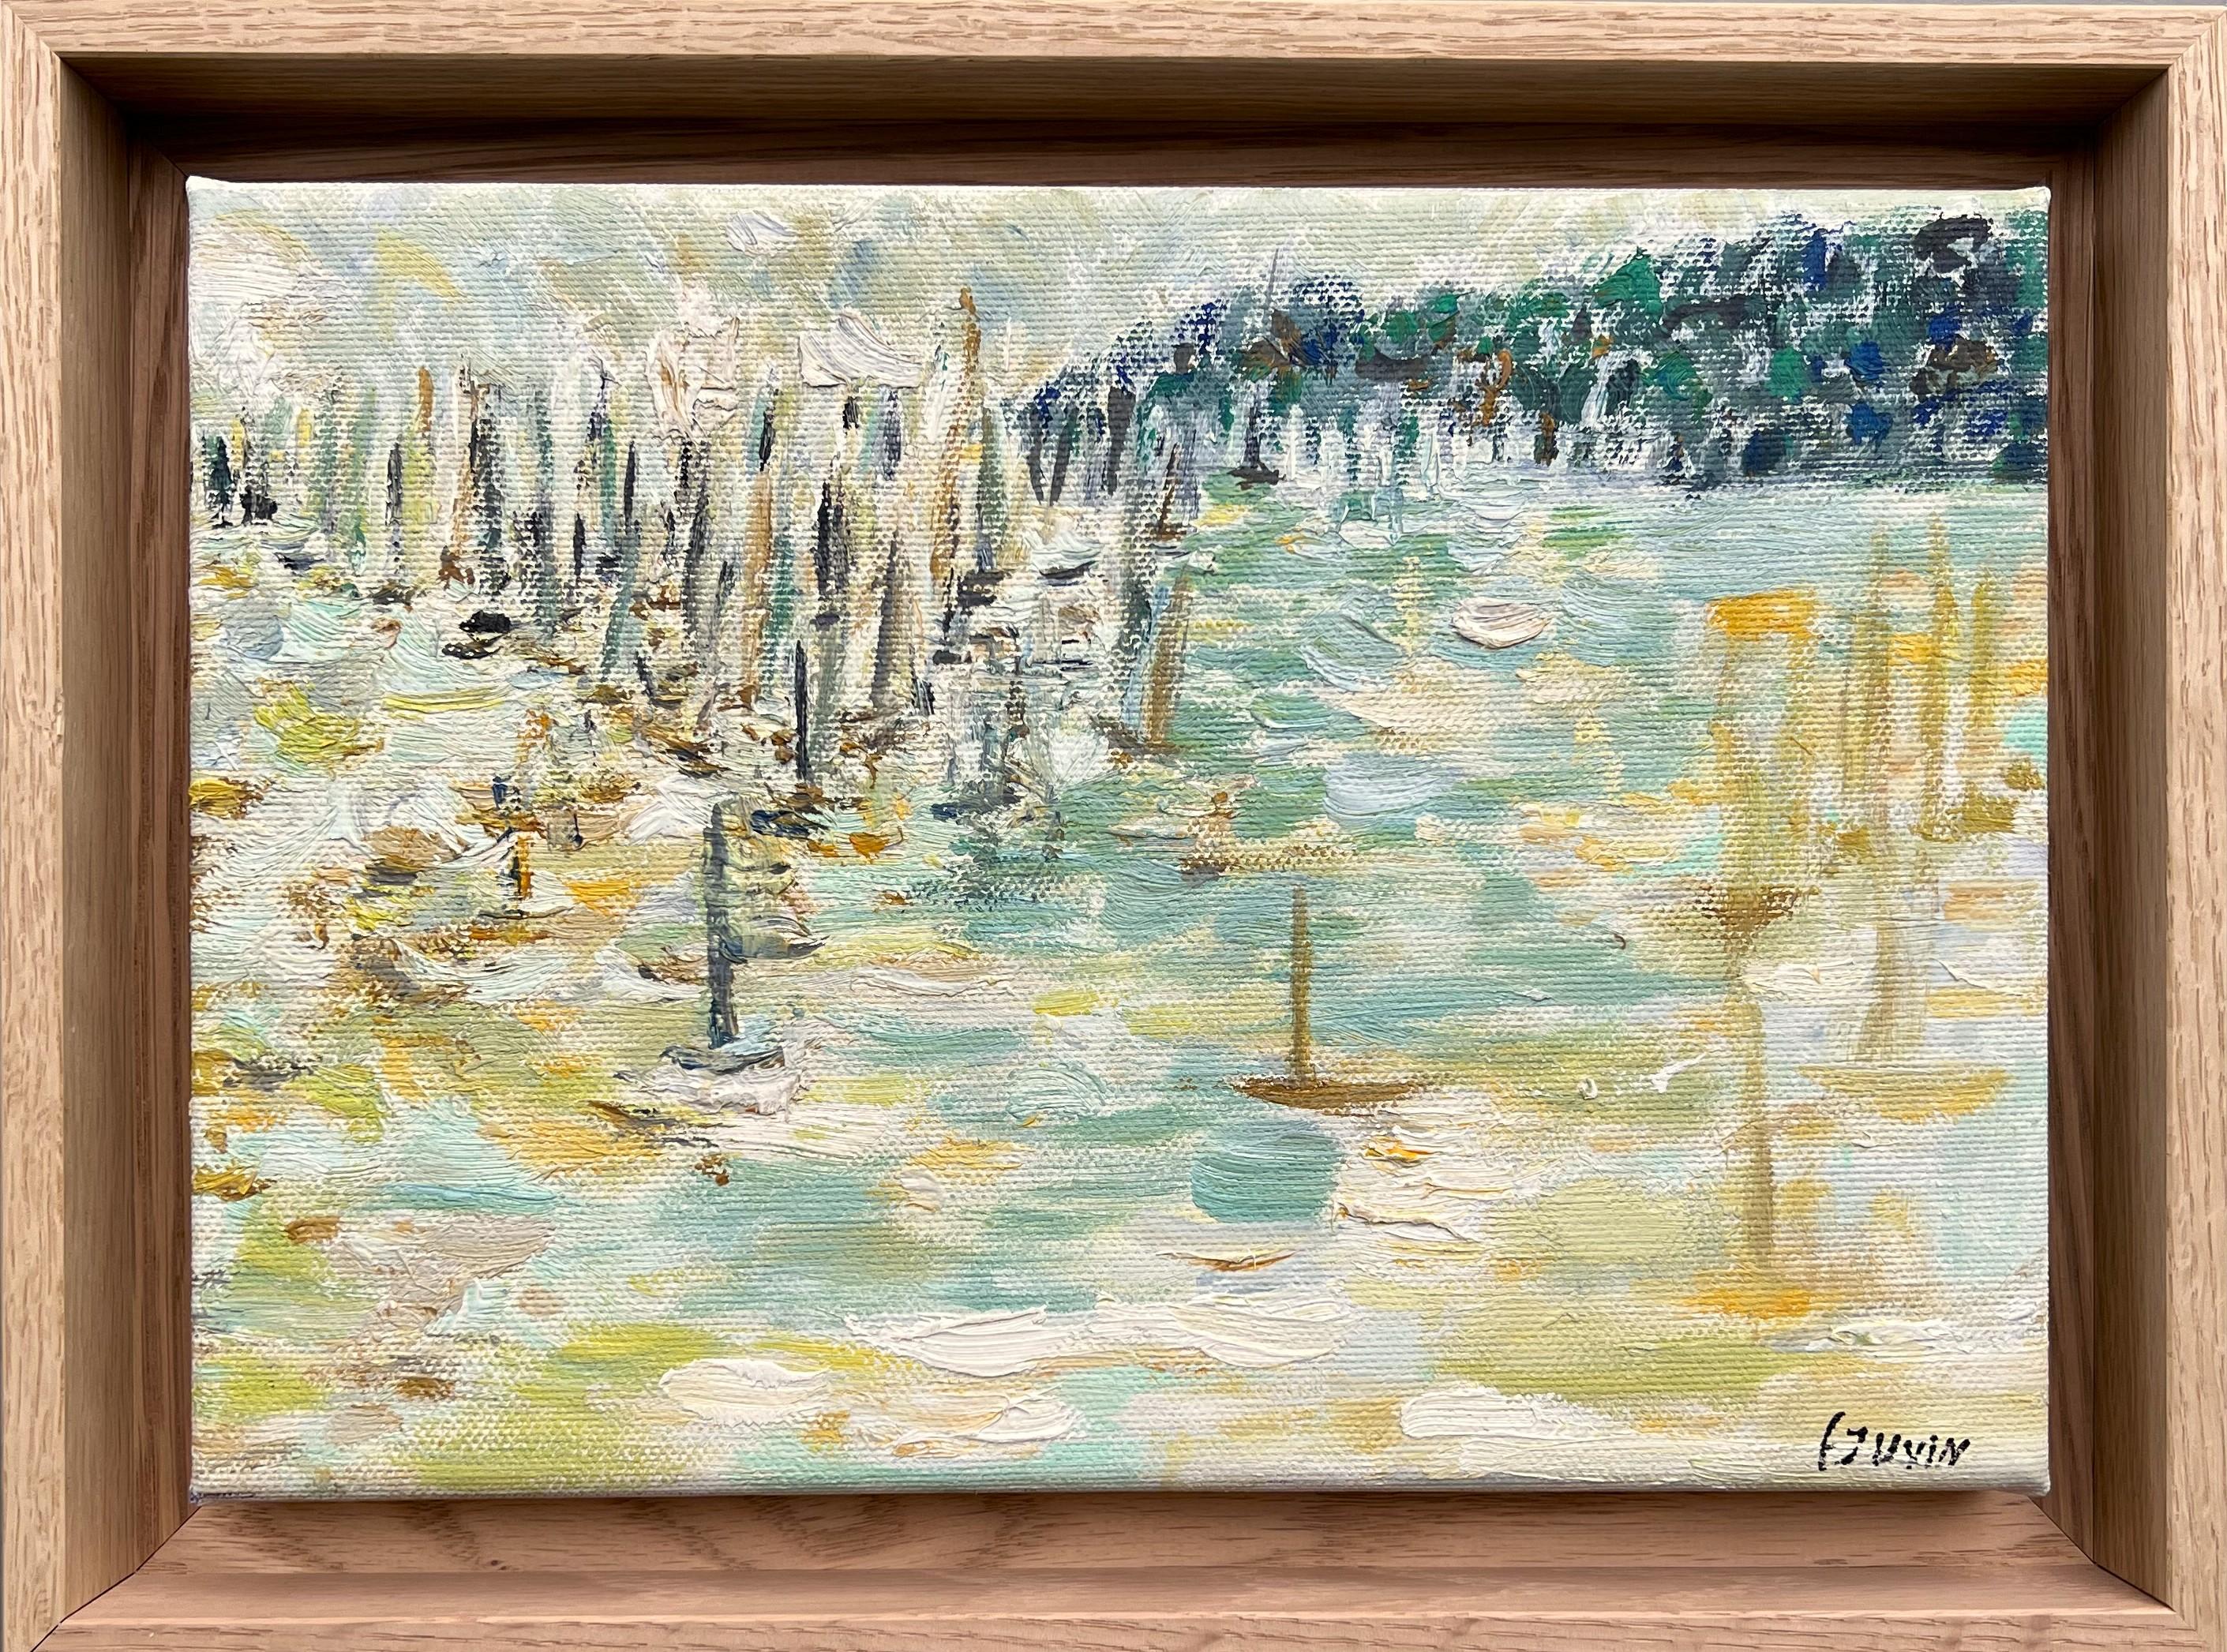 Boats in the bay of Cannes, Landscape, oil painting on canvas by Françoise Juvin